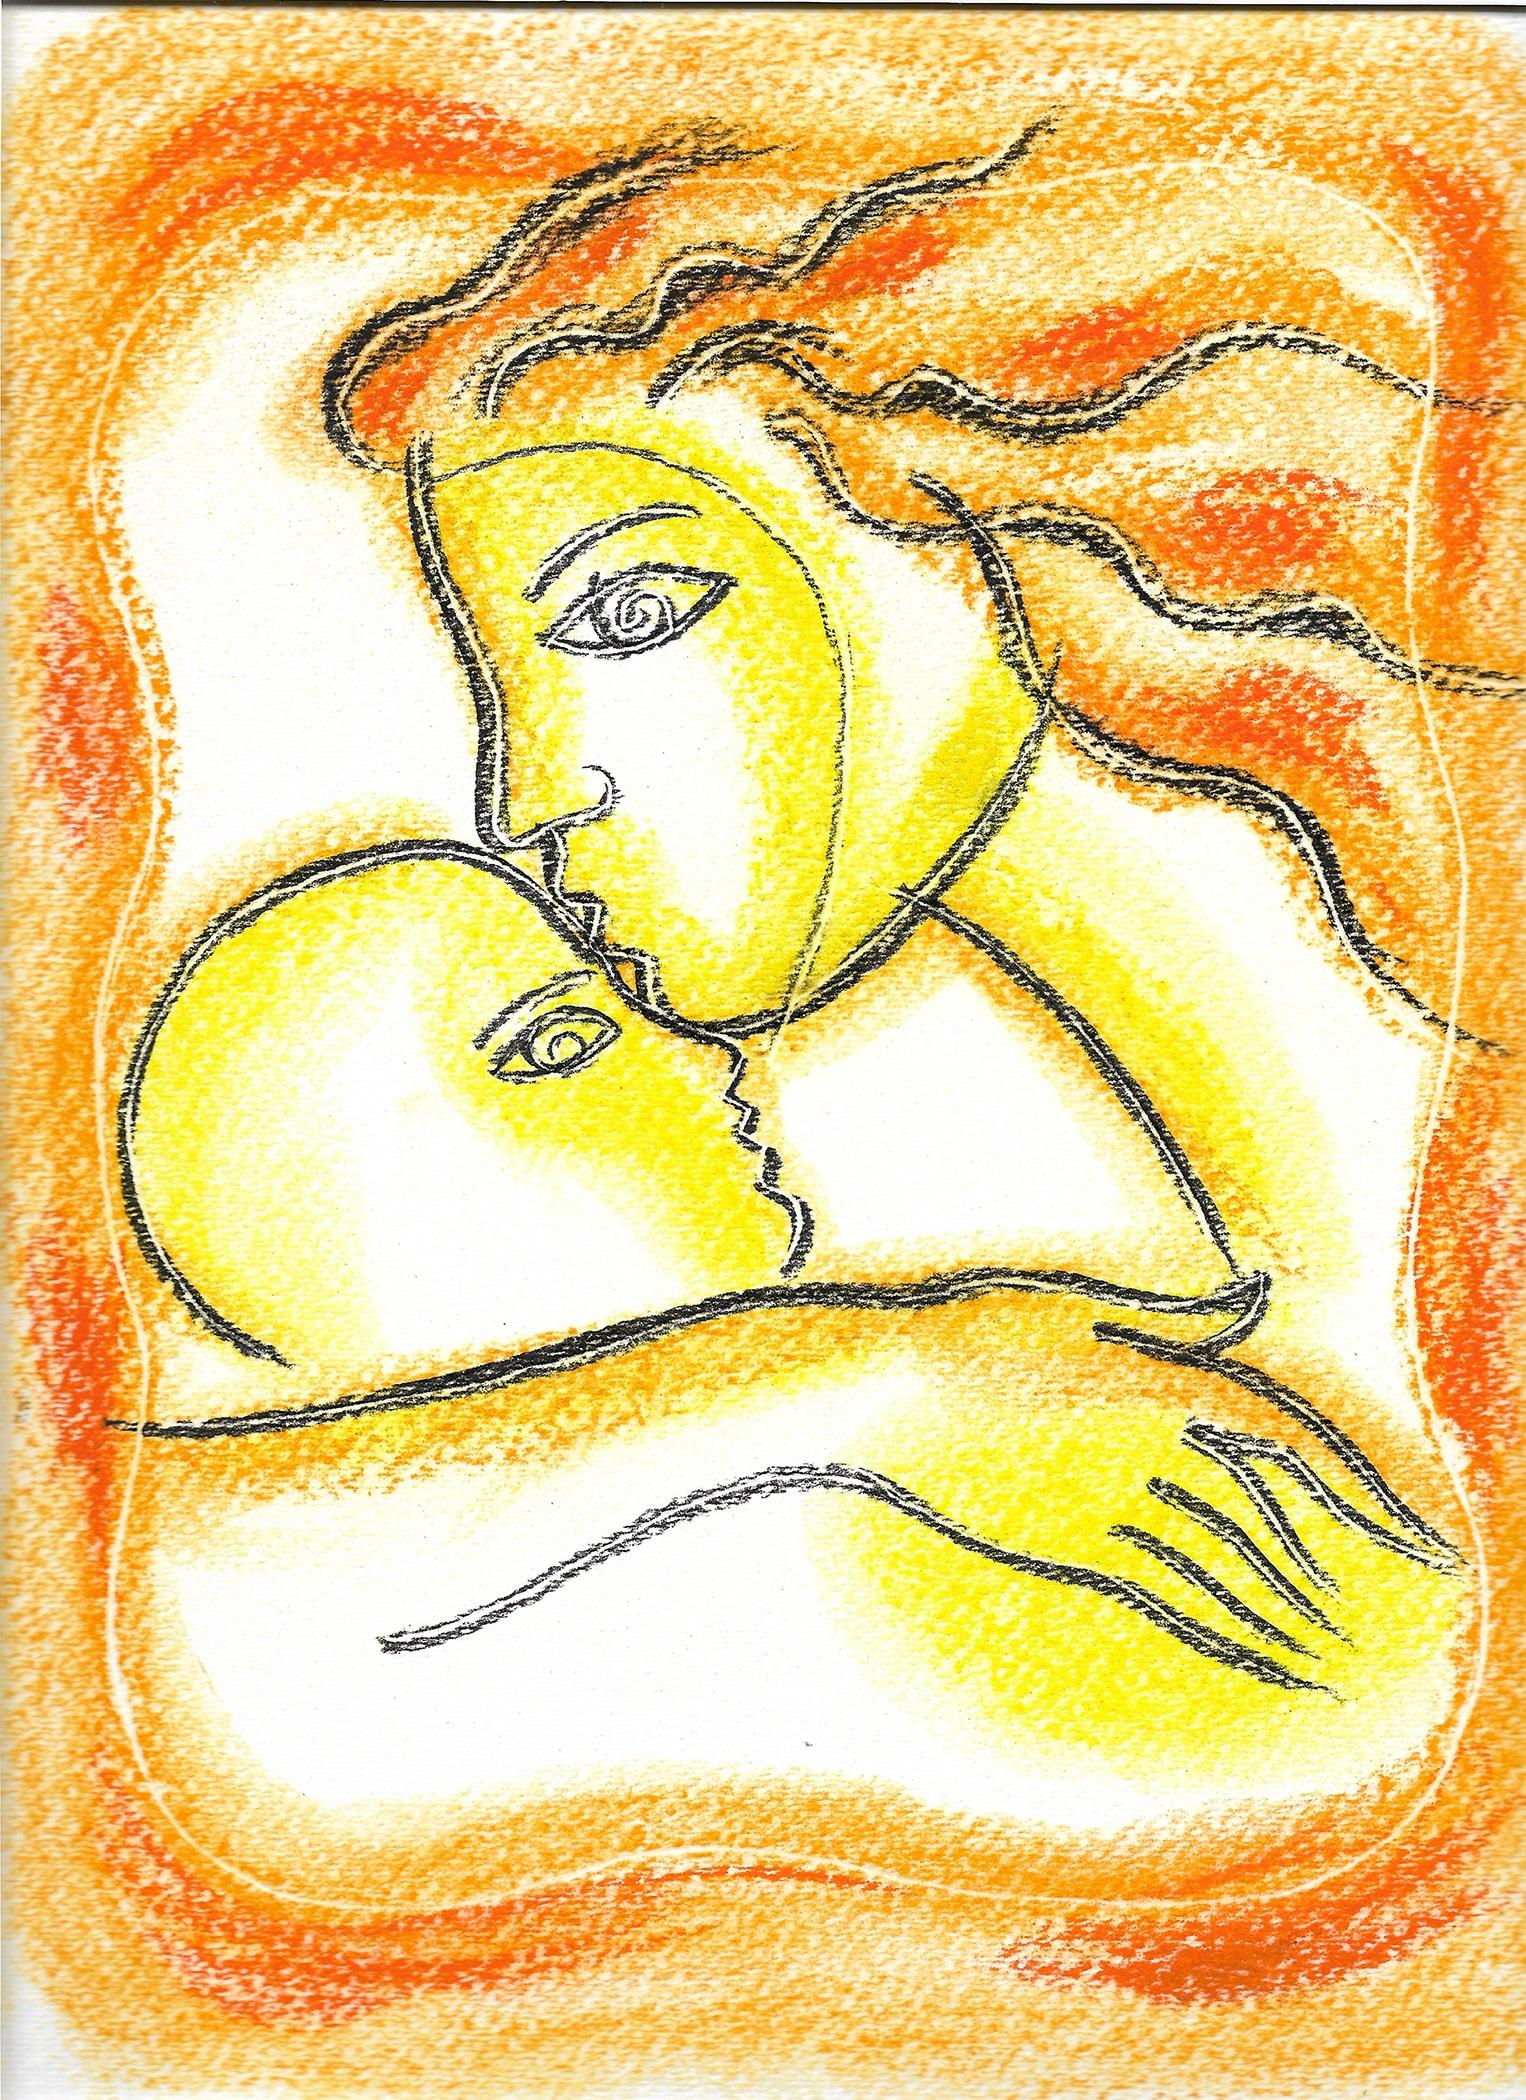 Mother and Baby, Drawing, Pastels on Paper - Art by Leon Zernitsky 